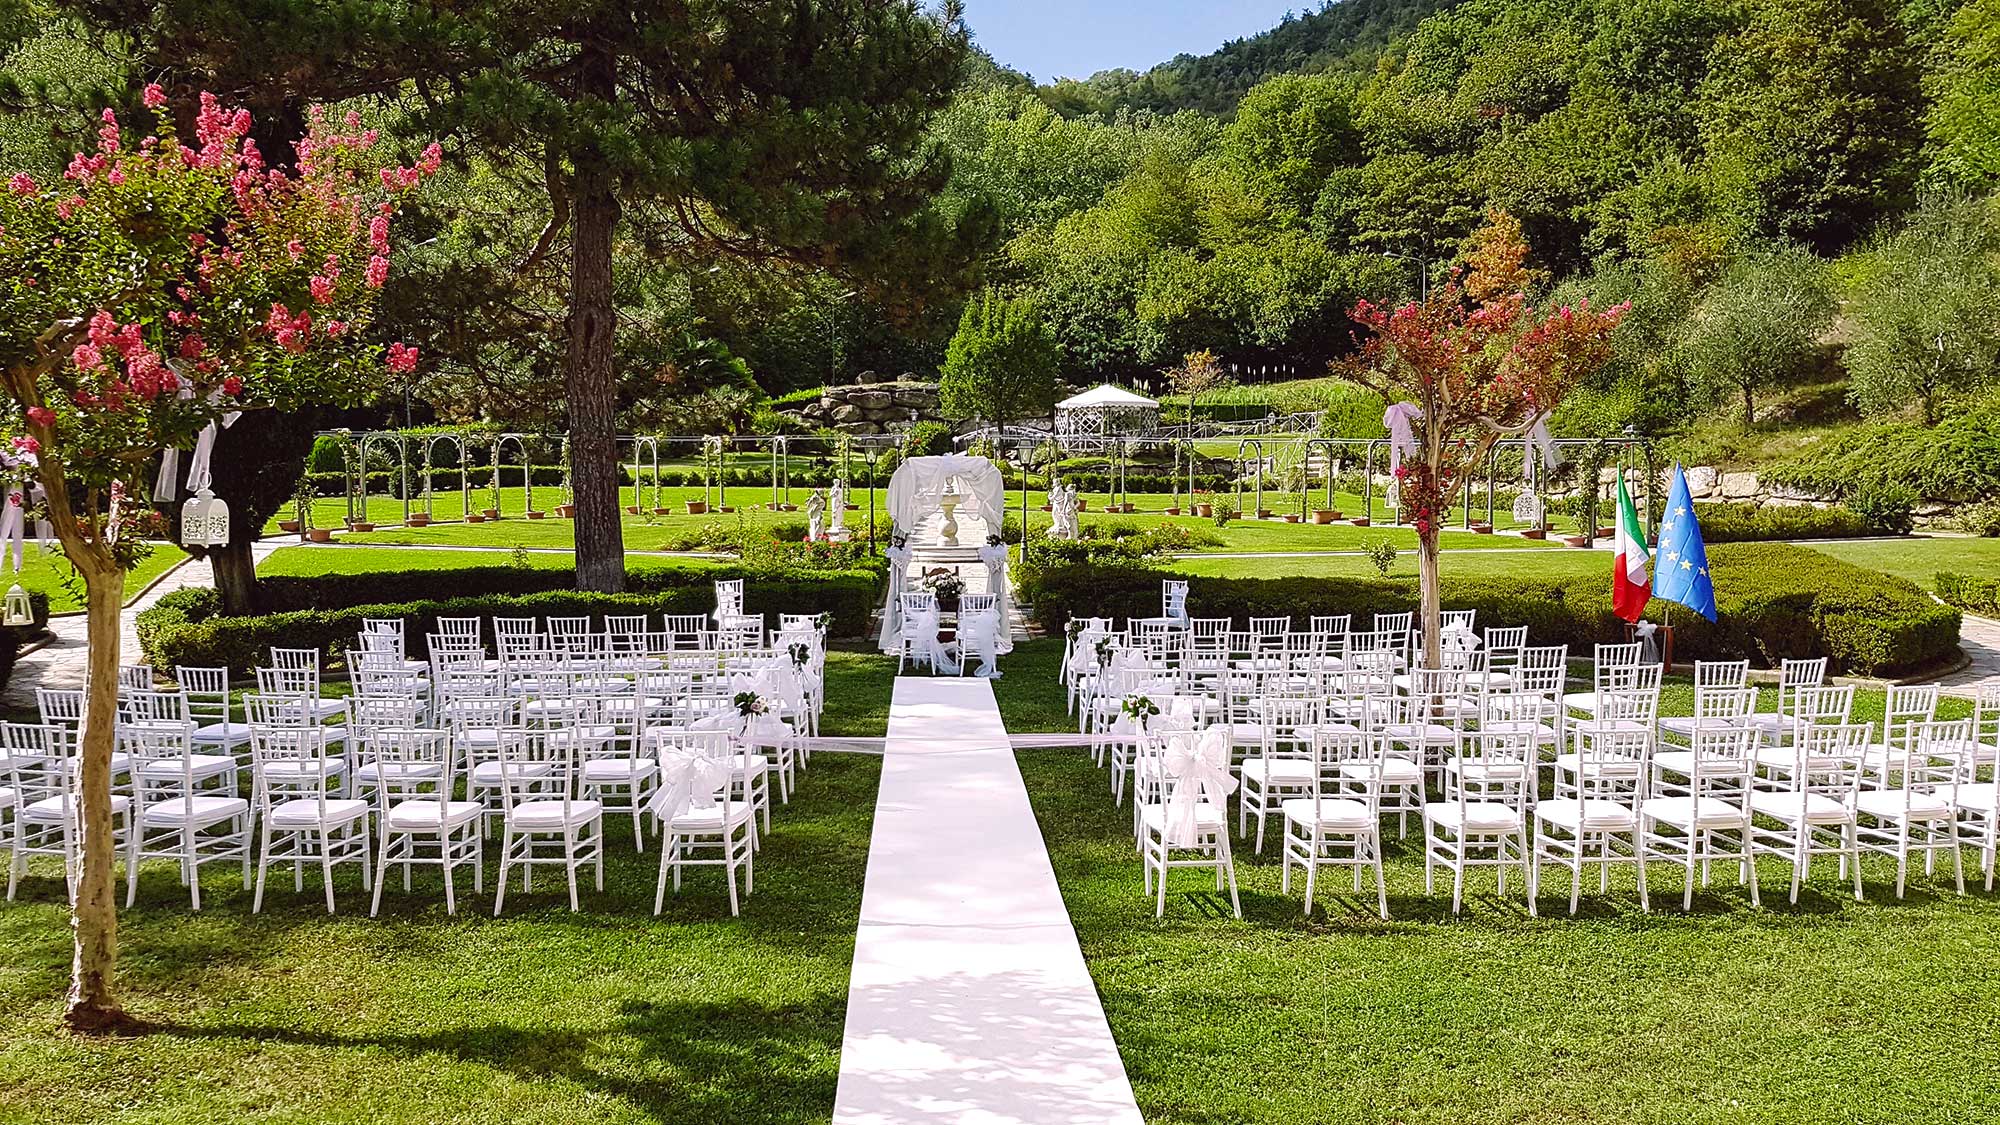 A wonderful park for organizing your reception amid the greenery